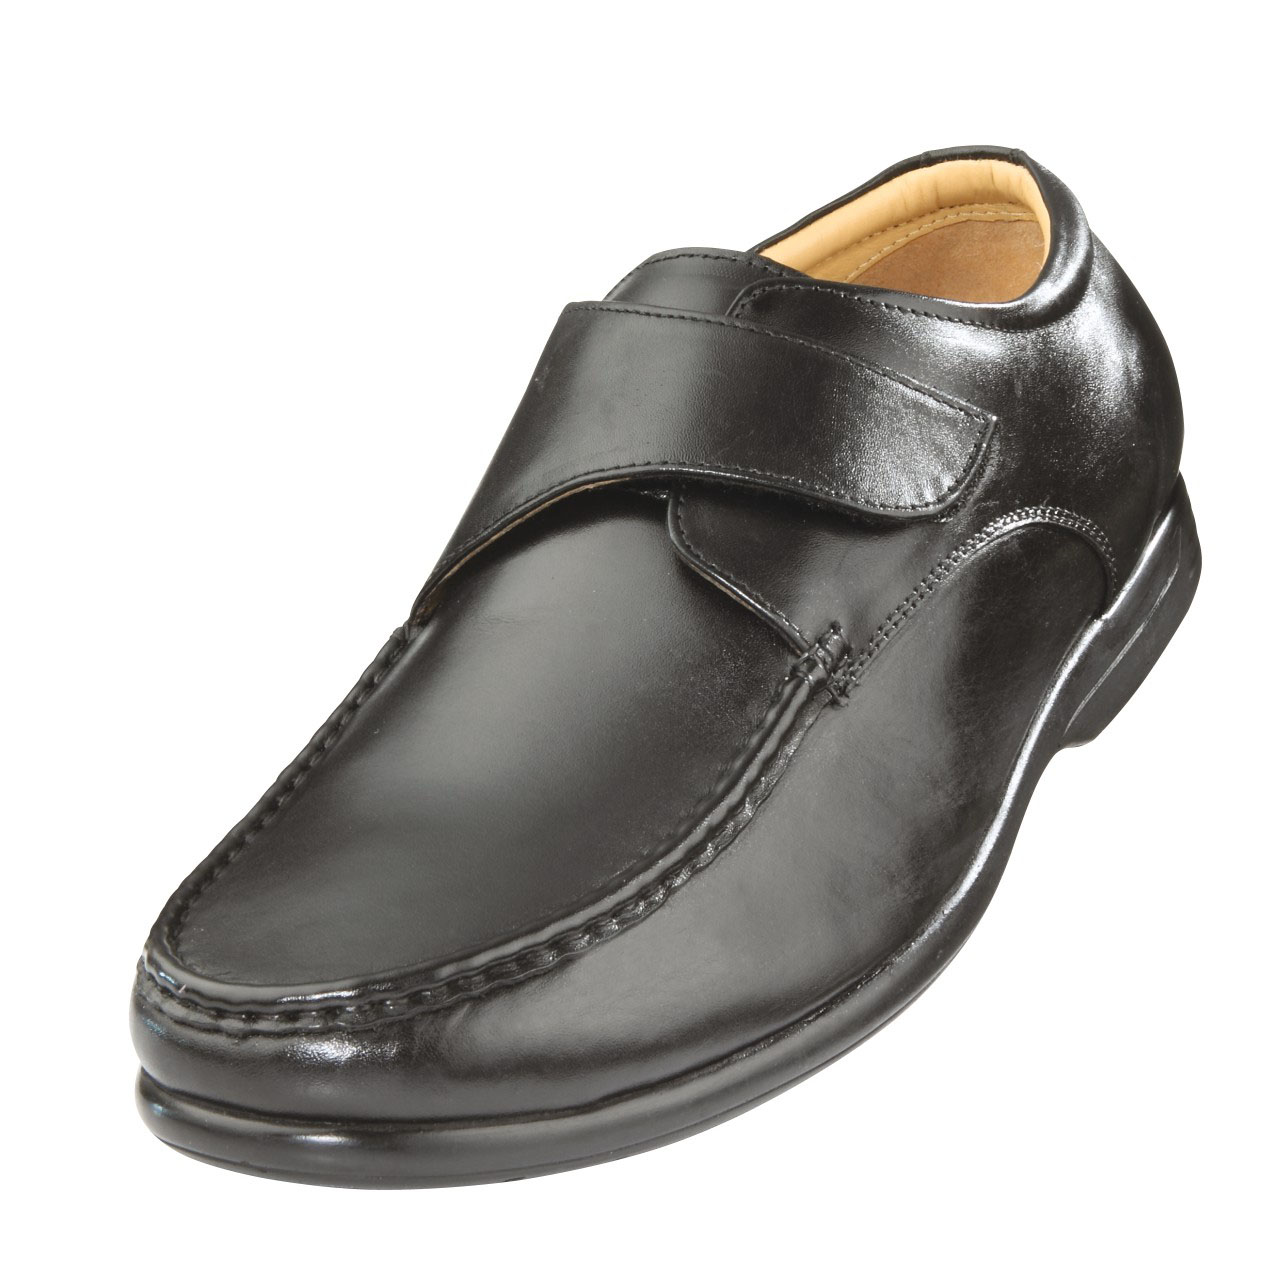 Extra-Wide Men?s Leather Adjustable Touch-Close Shoes